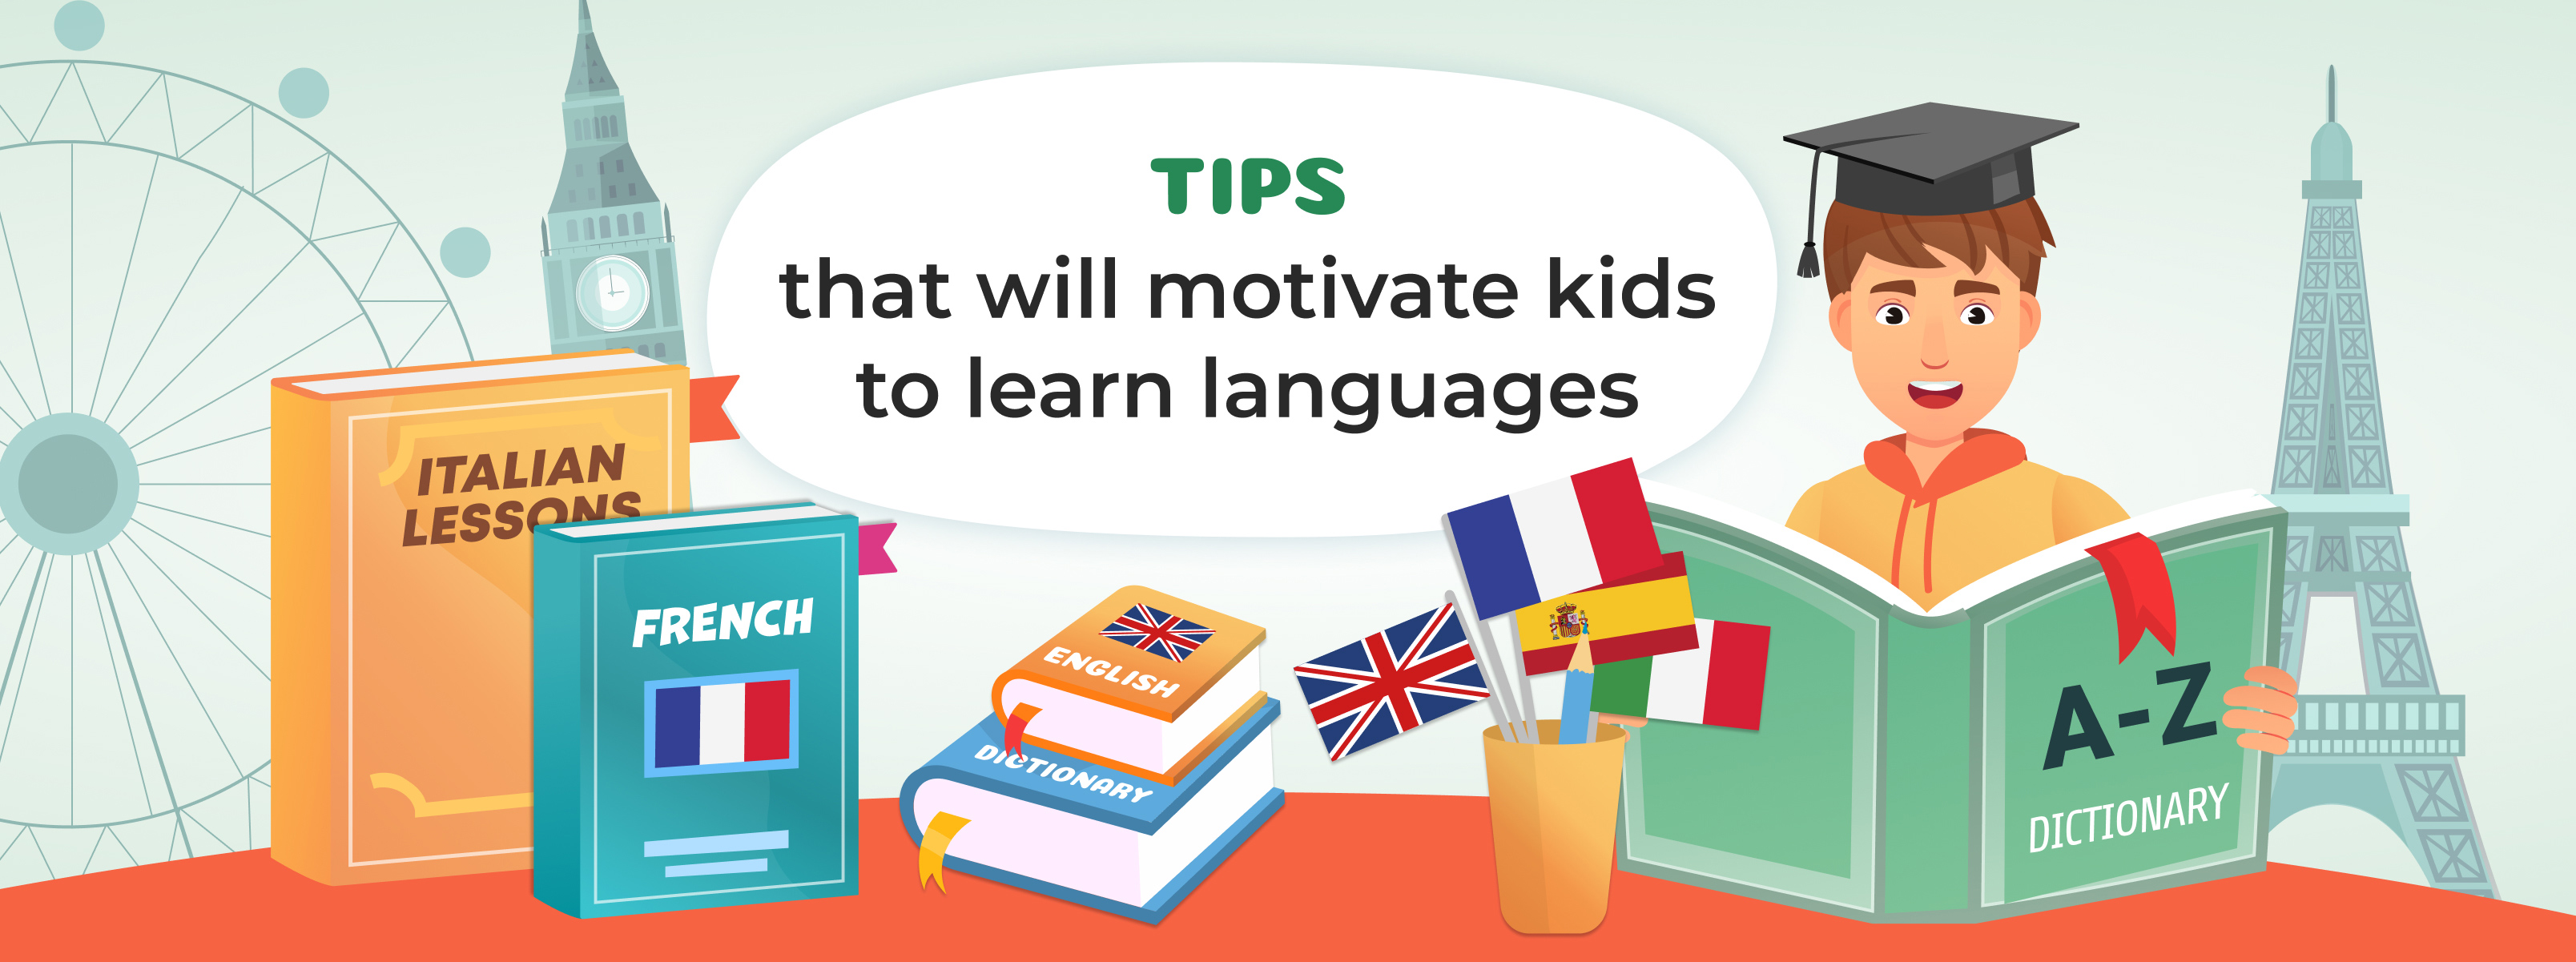 Tips and Resources that will Motivate Kids to Learn Languages